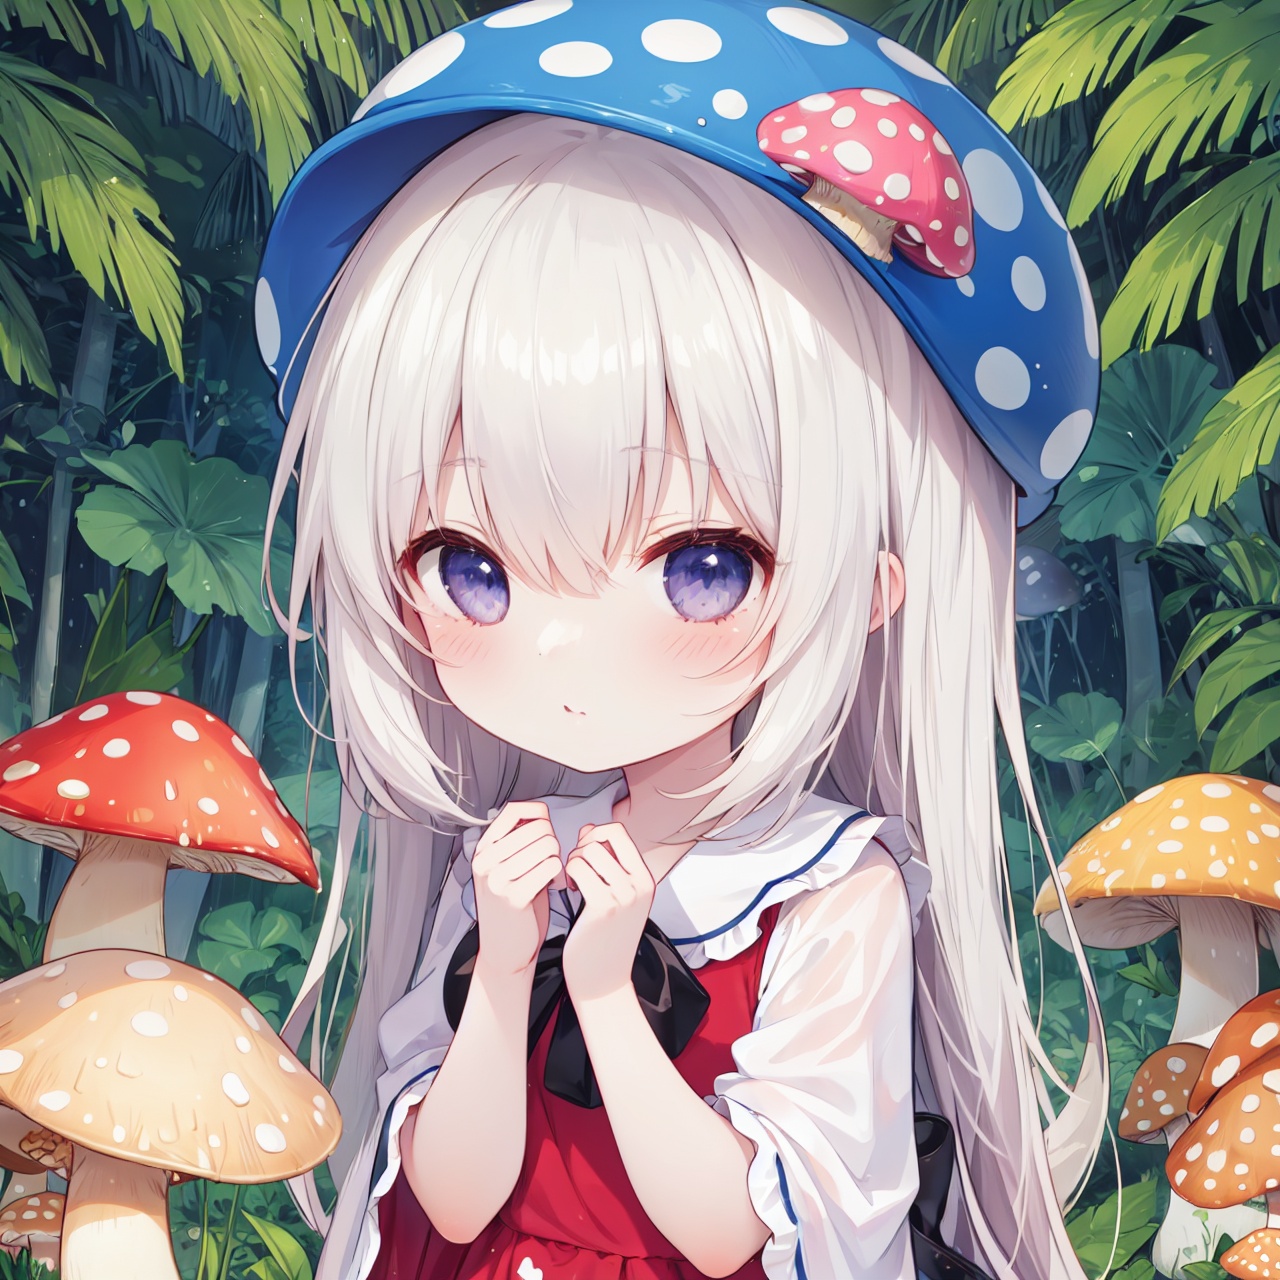 (1 loli:1.3),Forest after rain,Amazon rainforest,lots of tropical trees,palm trees,lots of giant mushrooms,lots of poison mushrooms,red and white spotted mushrooms,purple mushrooms,yellow mushrooms,white mushrooms,explosion mushrooms,charm mushrooms,fluorescent mushrooms,(monsterification:1.3),(1 giant mushroom_girl, wearing Spotted dress, spotted mushroom hair),(spotted mushroom hat:1.2),(upper body),(cute face),beautiful eyes,(detailed light),(extremely delicate and beautiful),volume light,best shadow,flash,Depth of field,